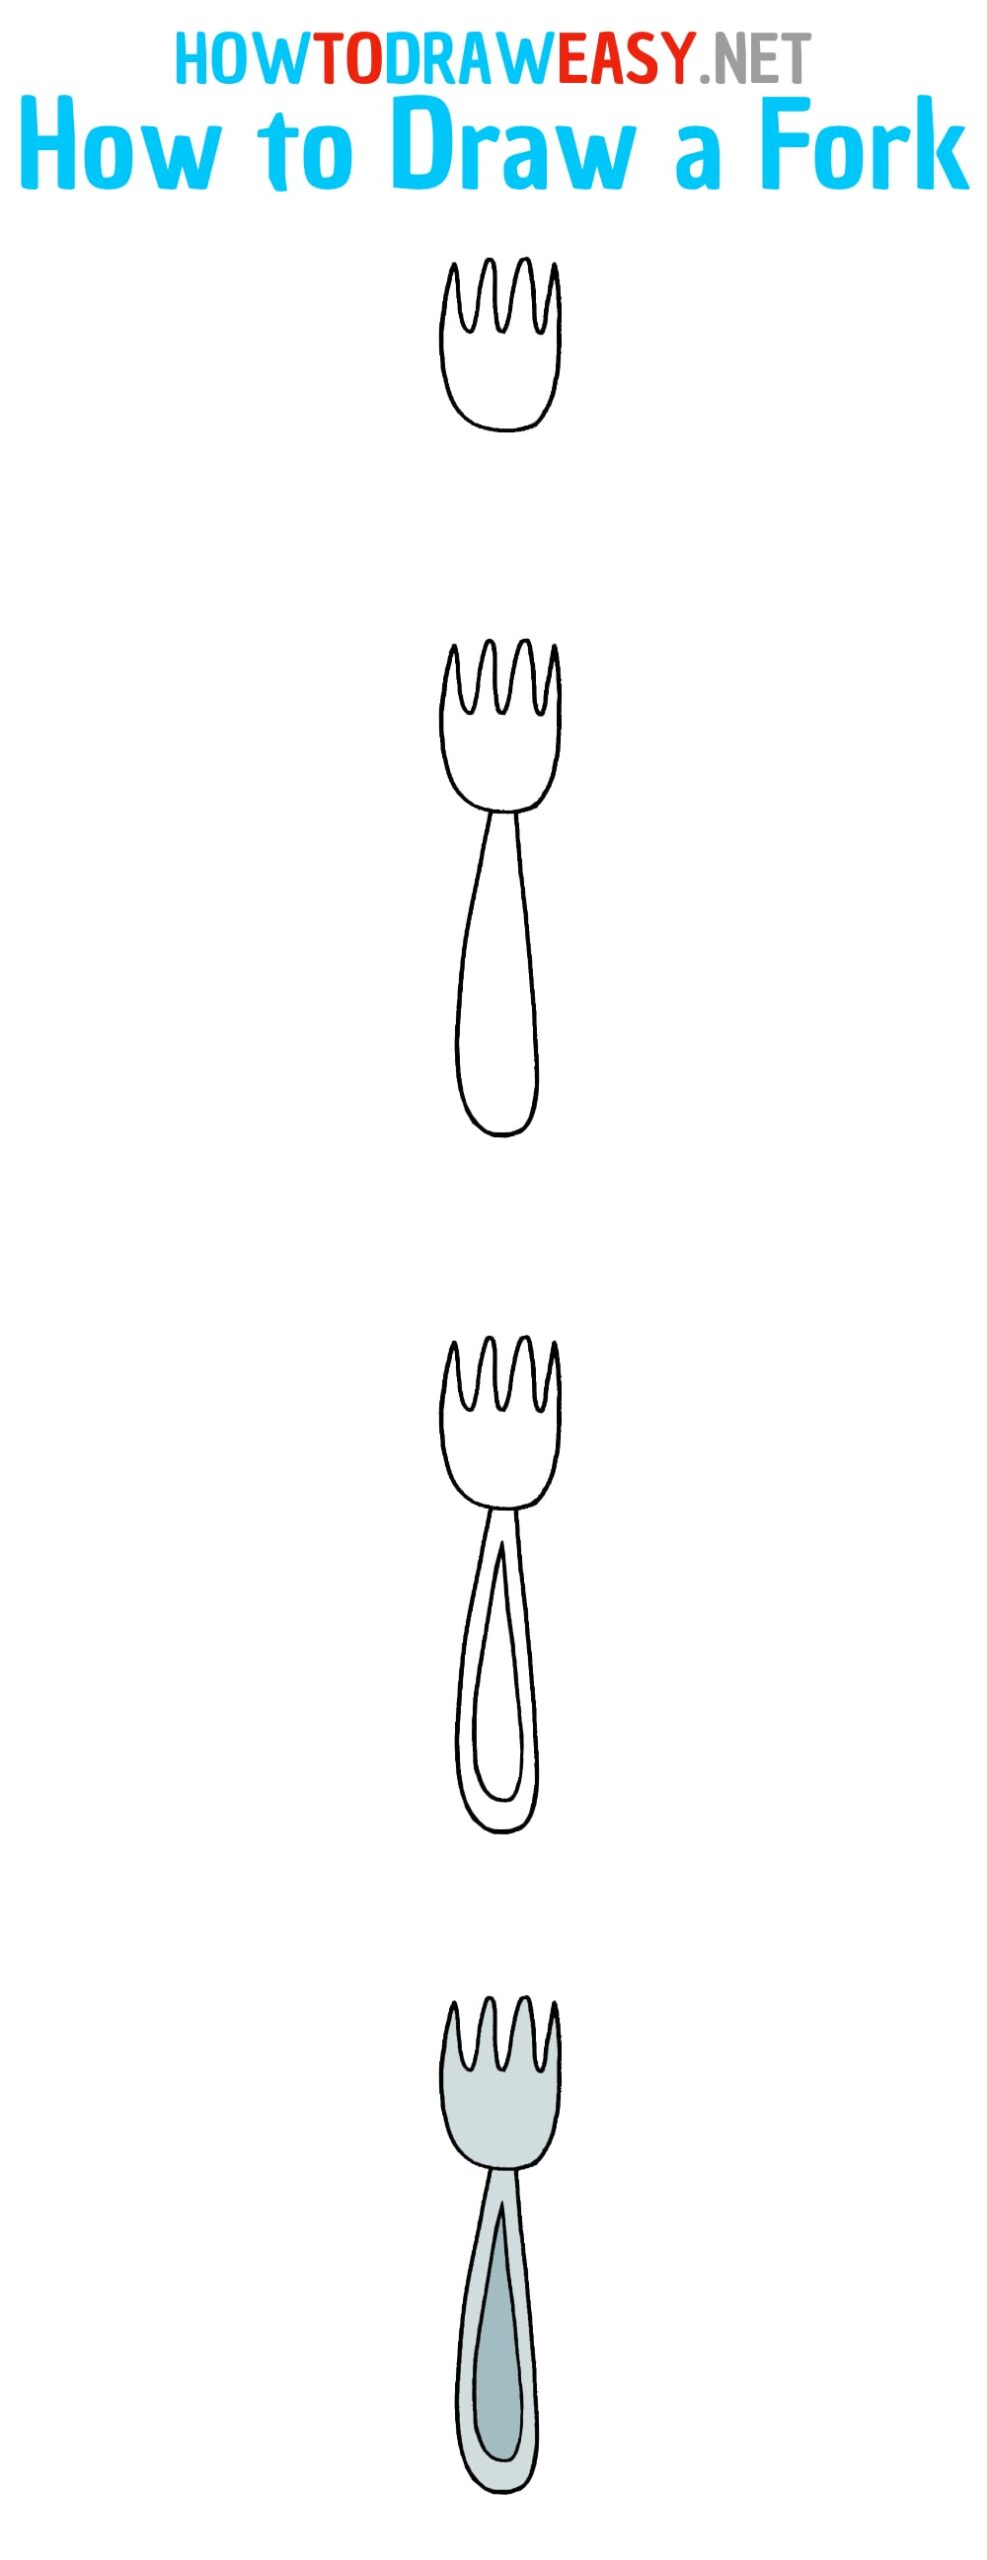 How to Draw a Fork Step by Step